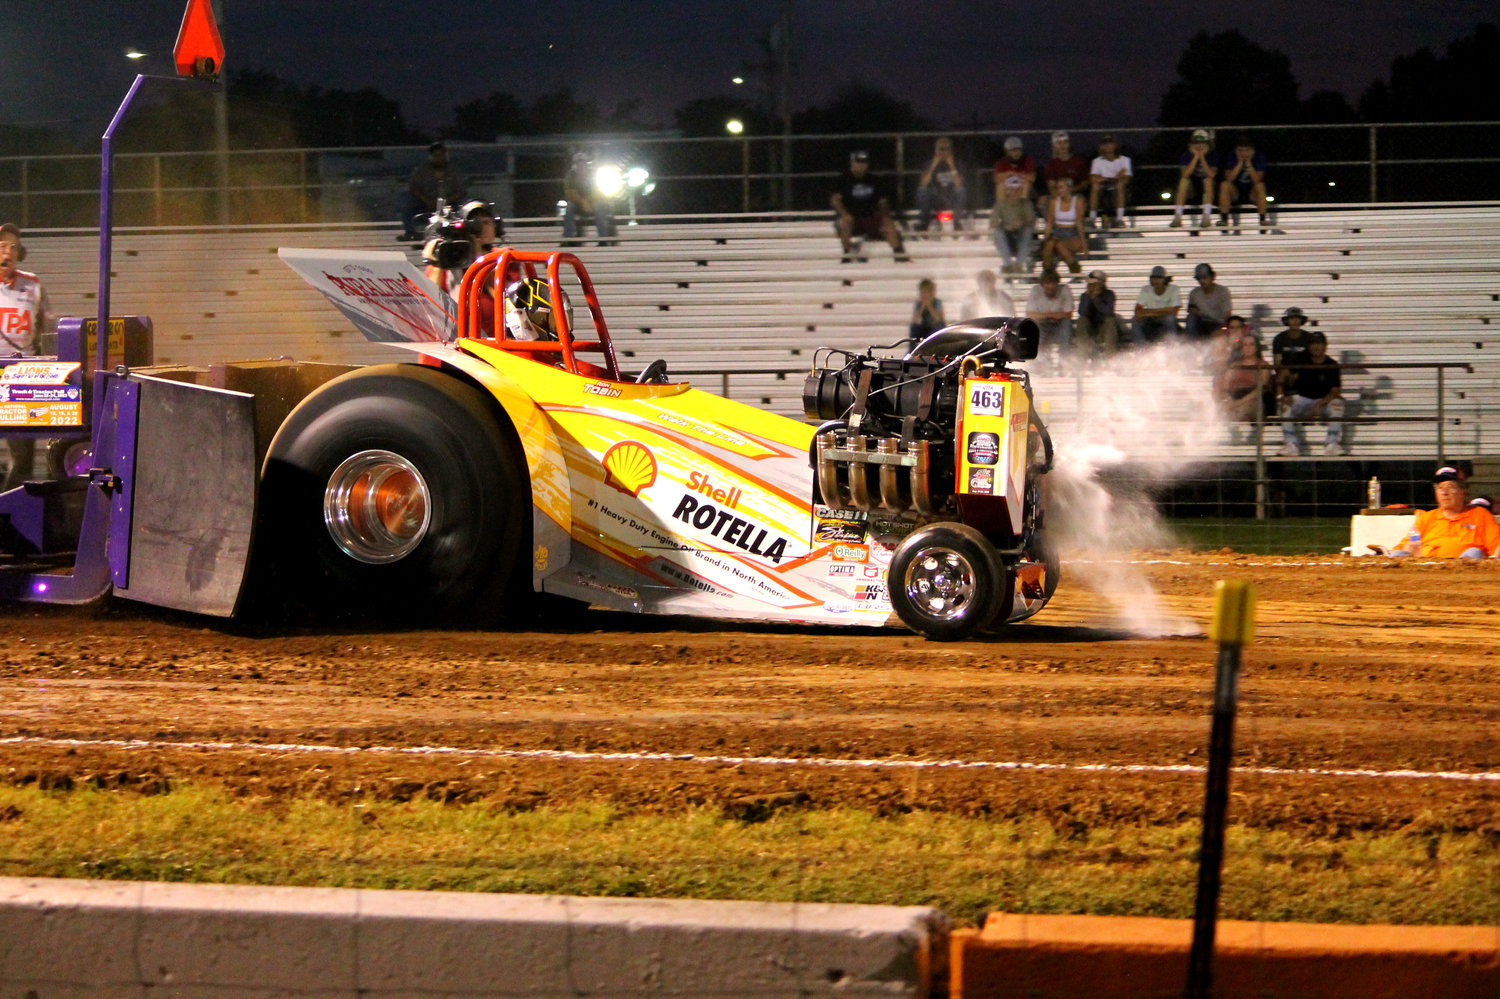 Ron Tobin's "Walk the Line" blew a hose in his pull on Friday night.